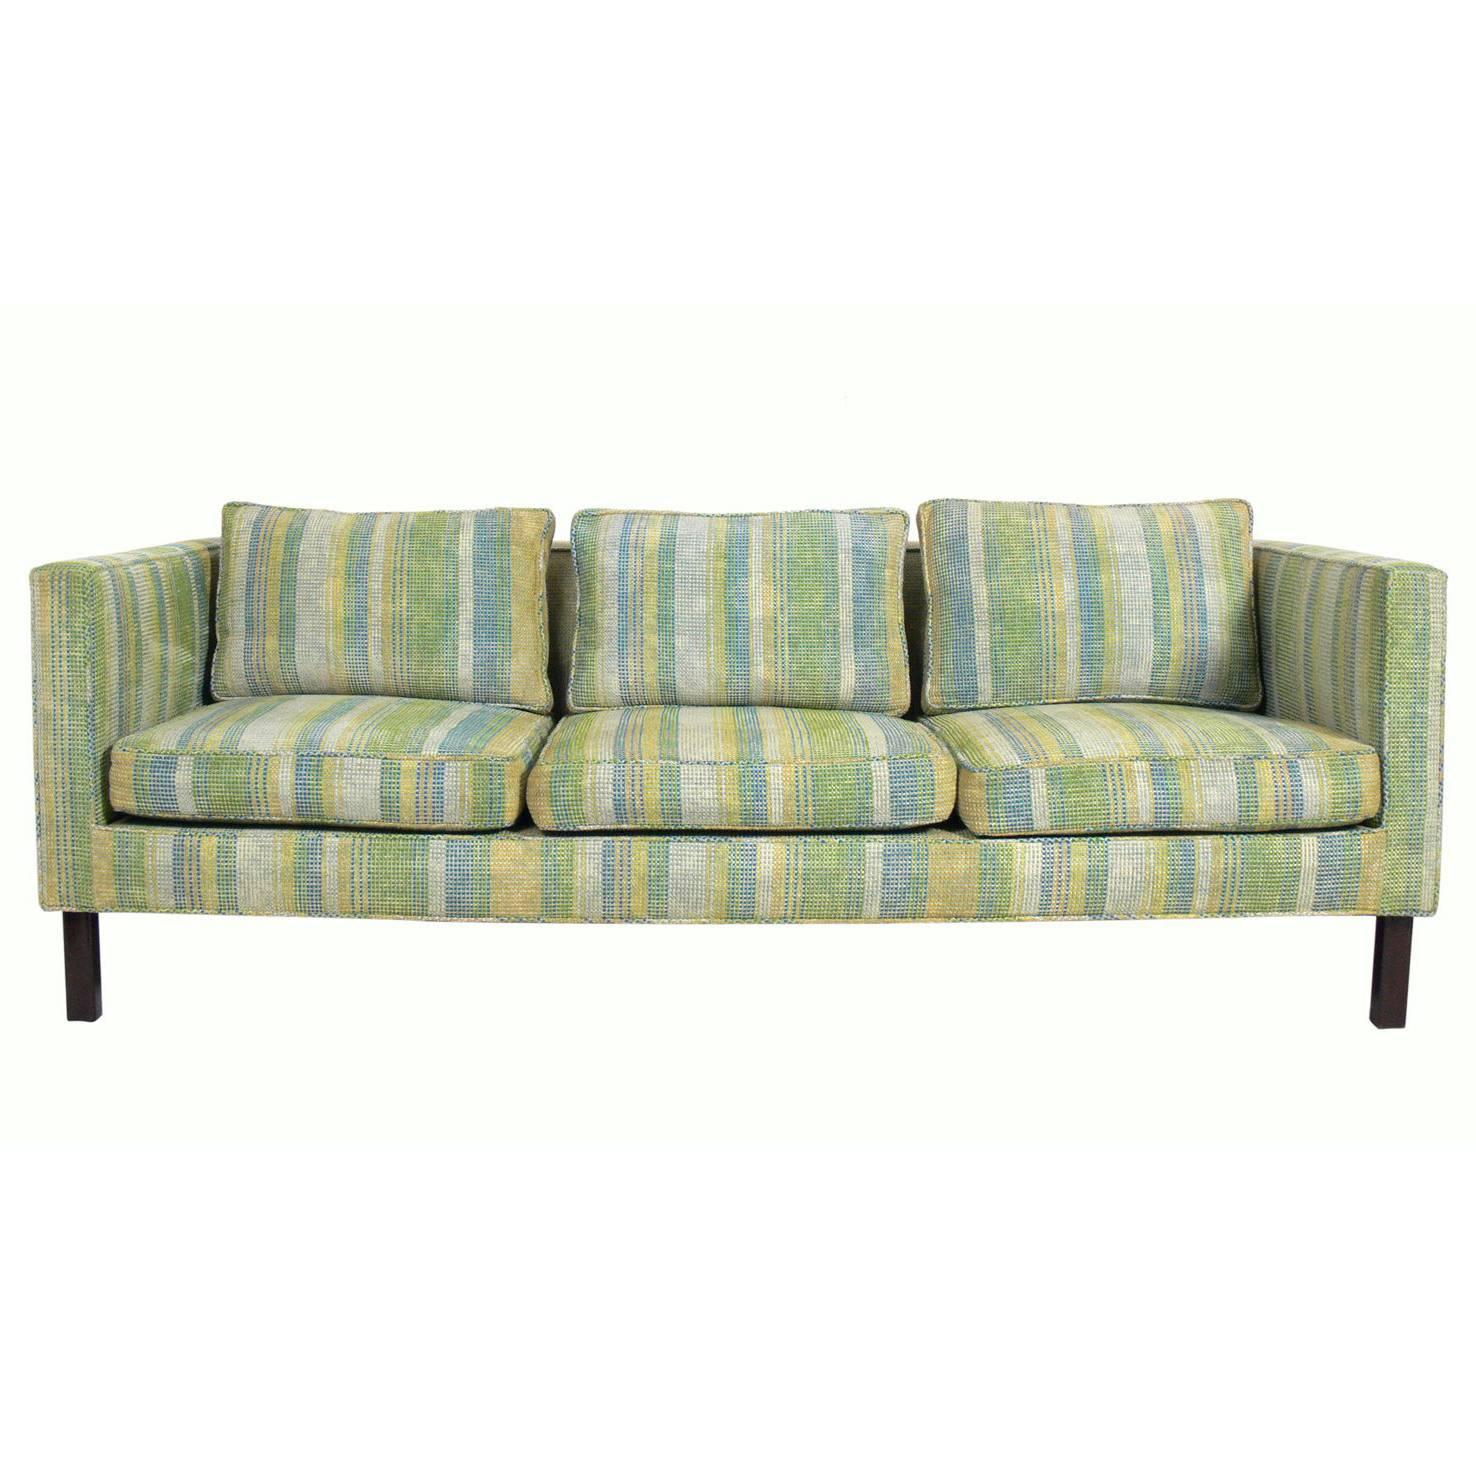 Clean Lined Sofa Designed by Edward Wormley for Dunbar